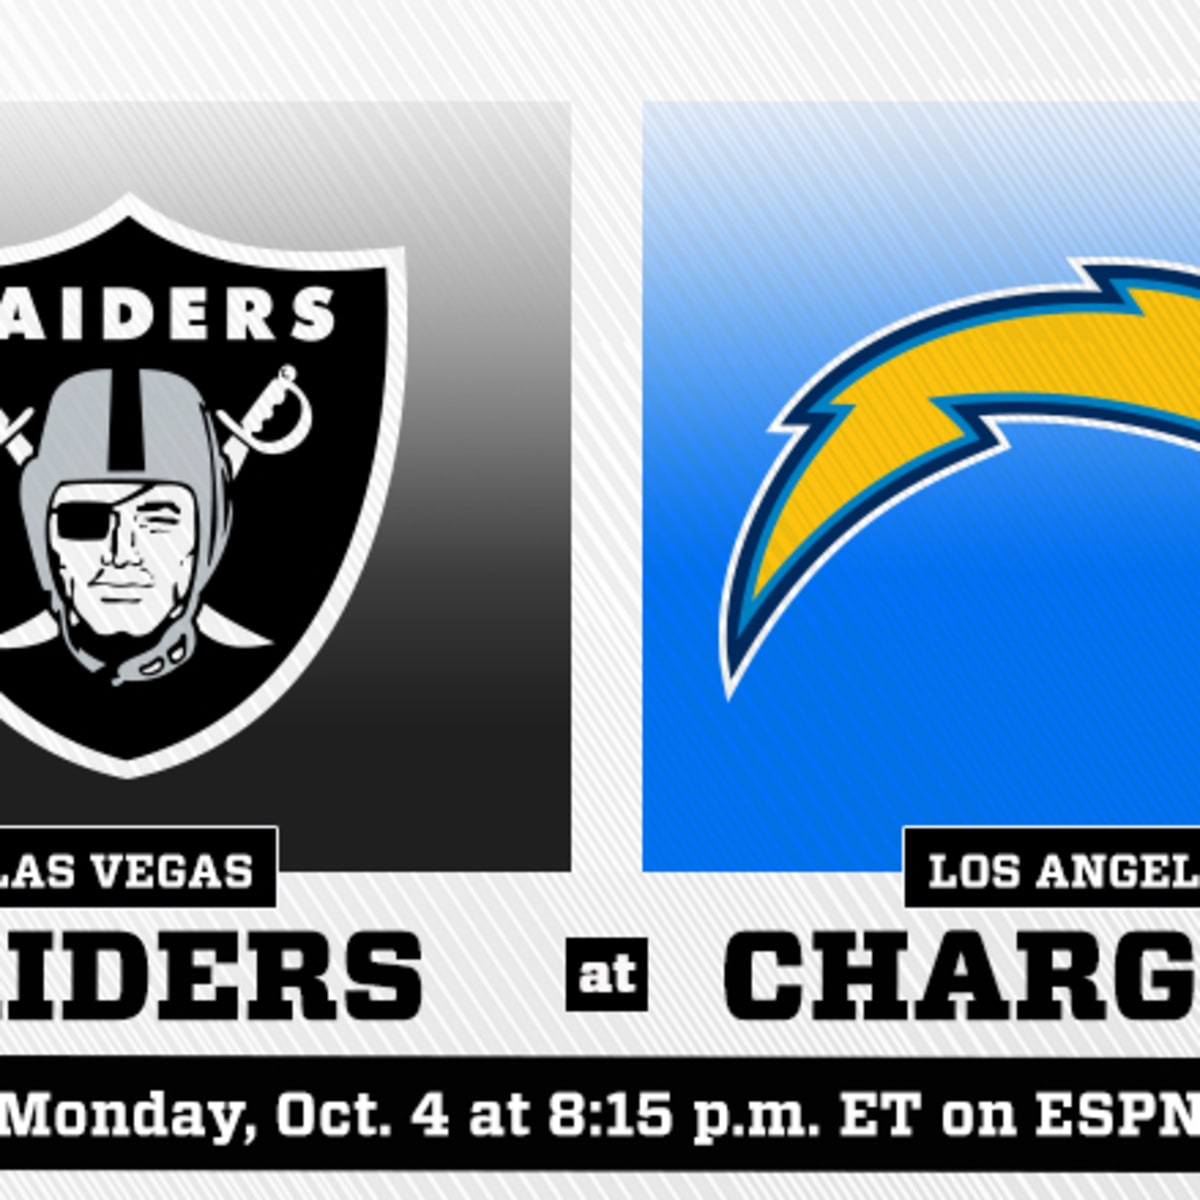 where are the raiders and chargers playing today